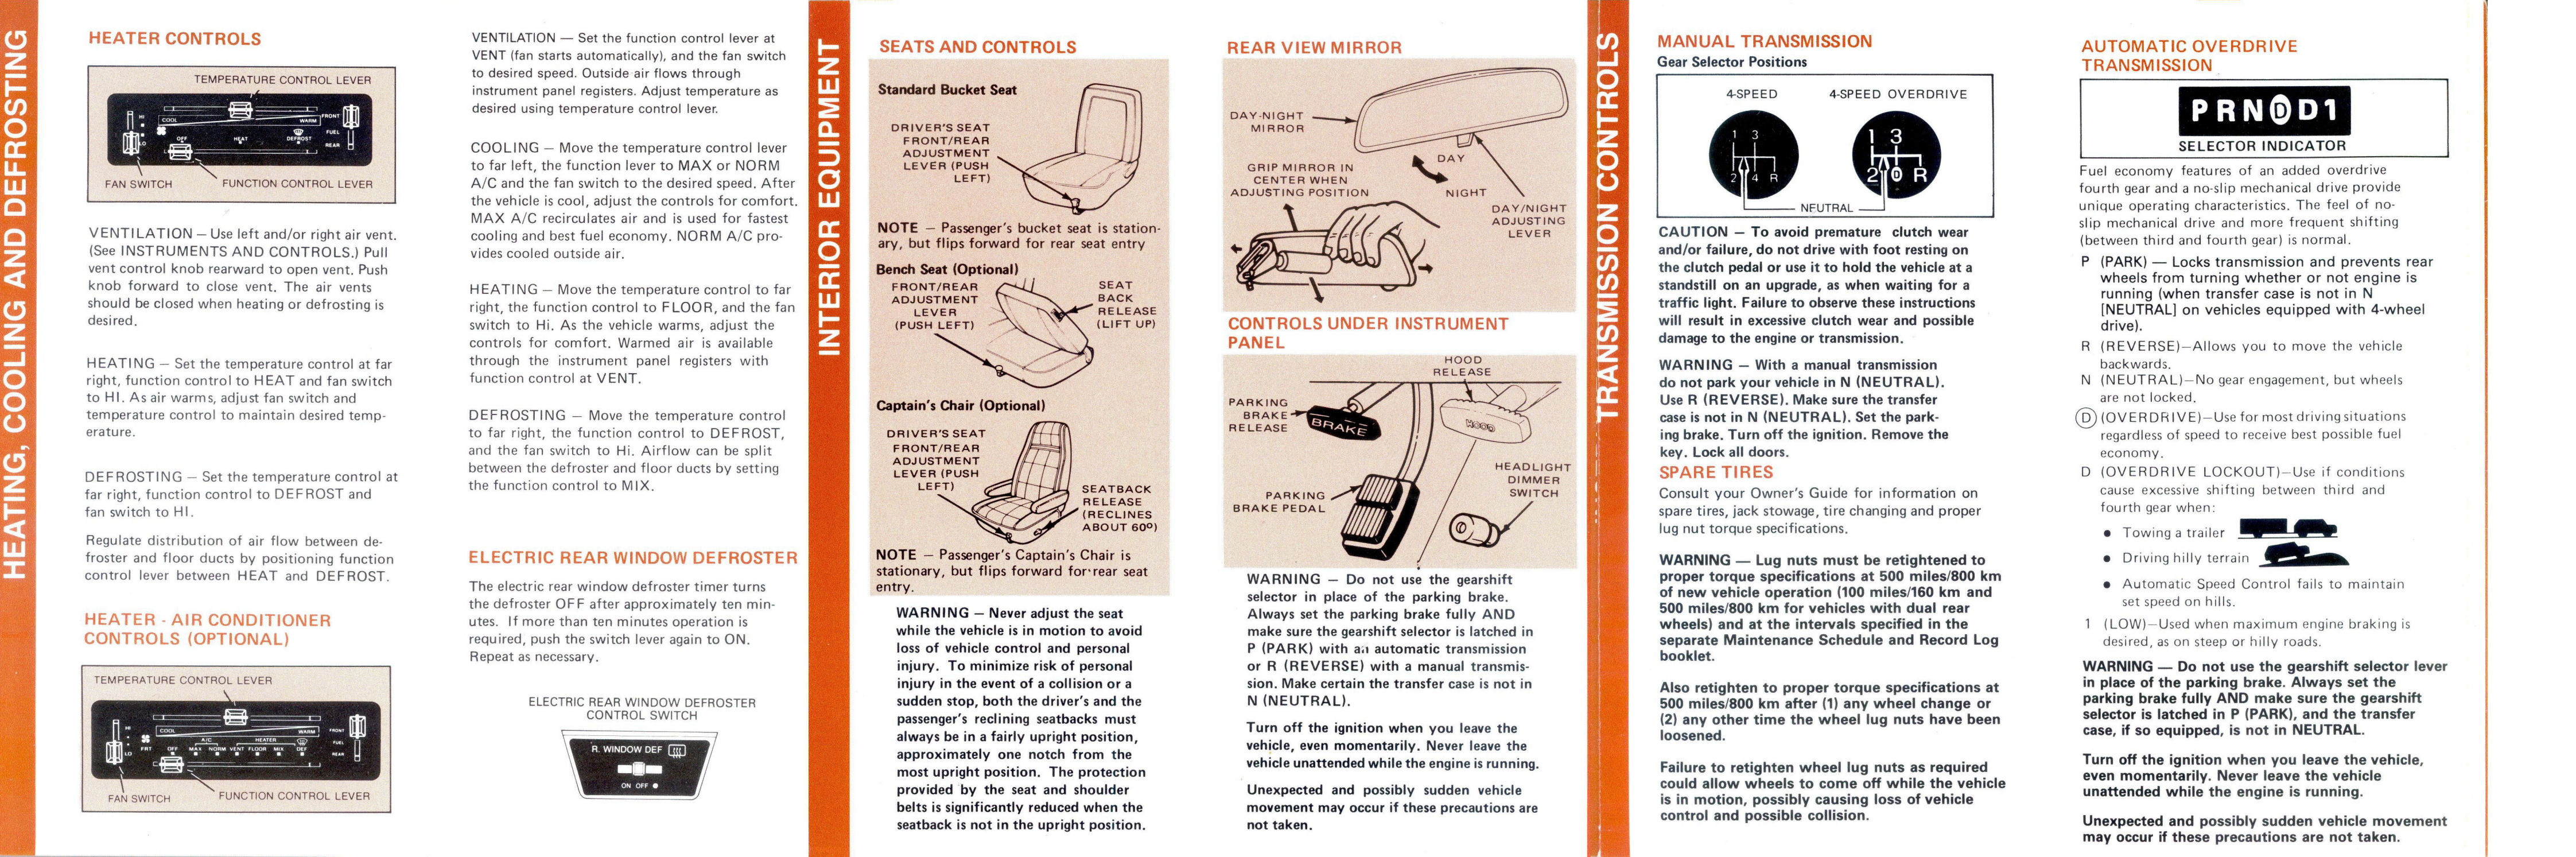 1986_Ford_Bronco_Operating_Guide-02